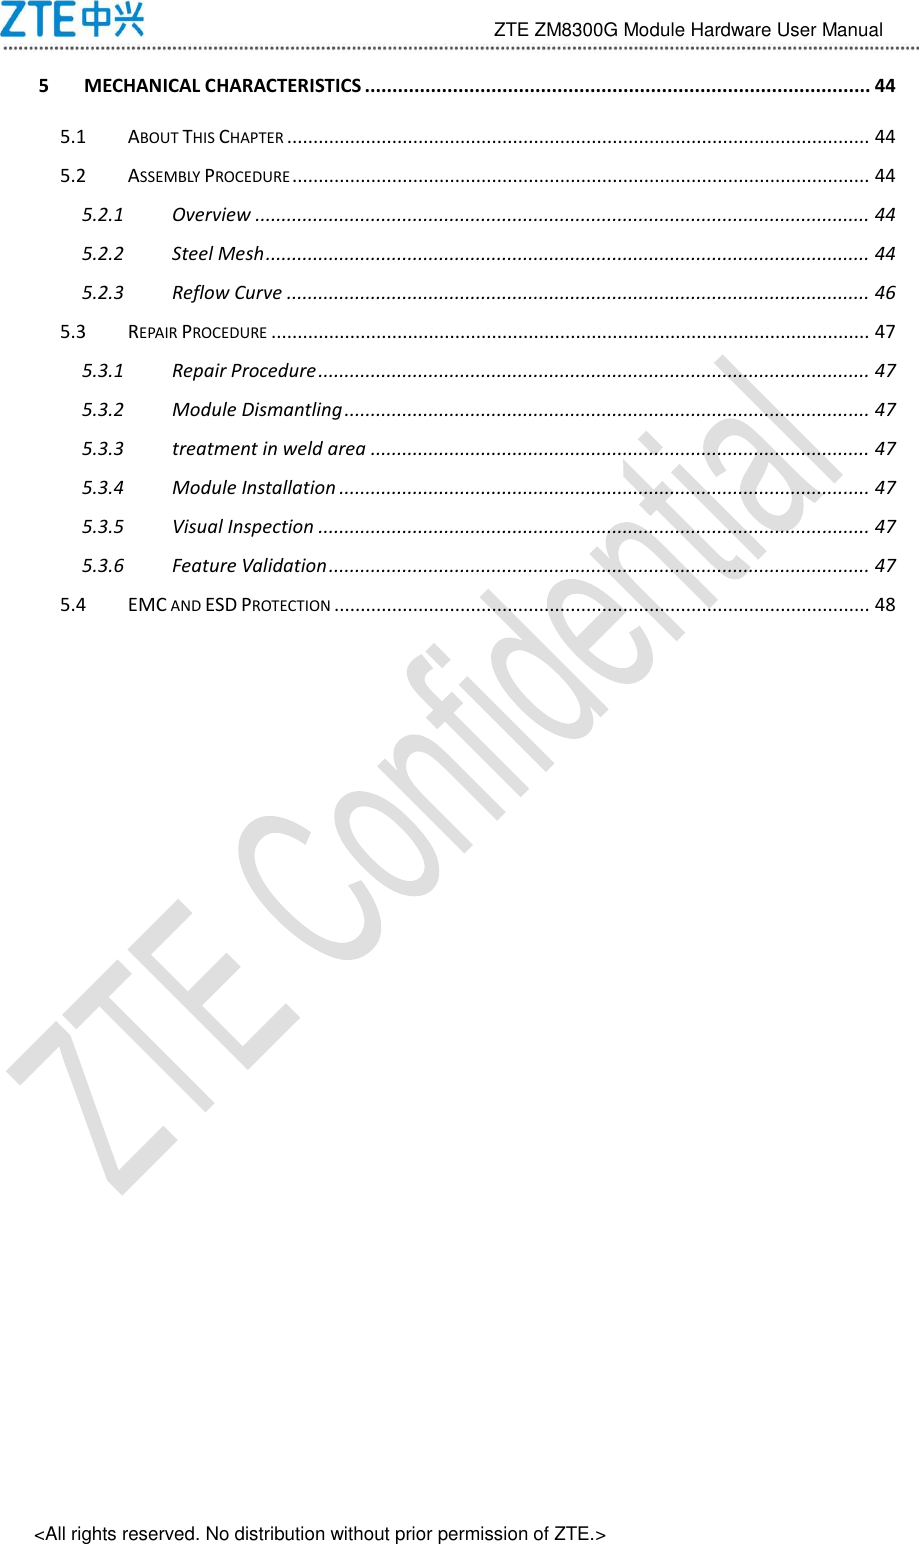                                 ZTE ZM8300G Module Hardware User Manual &lt;All rights reserved. No distribution without prior permission of ZTE.&gt; 5 MECHANICAL CHARACTERISTICS ............................................................................................ 44 5.1 ABOUT THIS CHAPTER ............................................................................................................... 44 5.2 ASSEMBLY PROCEDURE .............................................................................................................. 44 5.2.1 Overview ..................................................................................................................... 44 5.2.2 Steel Mesh ................................................................................................................... 44 5.2.3 Reflow Curve ............................................................................................................... 46 5.3 REPAIR PROCEDURE .................................................................................................................. 47 5.3.1 Repair Procedure ......................................................................................................... 47 5.3.2 Module Dismantling .................................................................................................... 47 5.3.3 treatment in weld area ............................................................................................... 47 5.3.4 Module Installation ..................................................................................................... 47 5.3.5 Visual Inspection ......................................................................................................... 47 5.3.6 Feature Validation ....................................................................................................... 47 5.4 EMC AND ESD PROTECTION ...................................................................................................... 48 